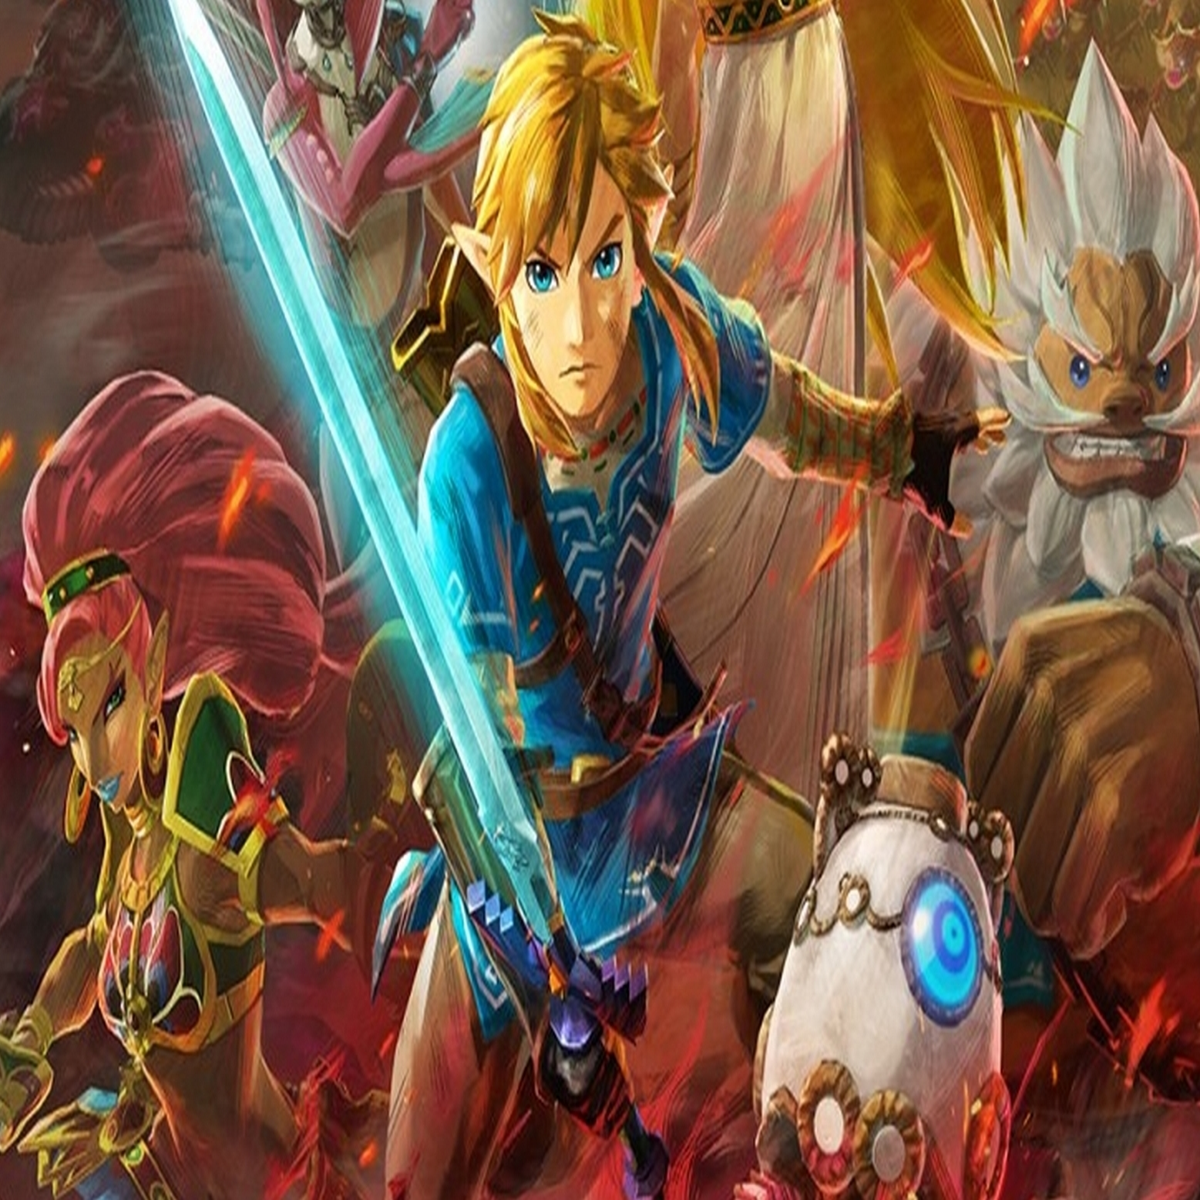 How long is Hyrule Warriors: Age of Calamity?